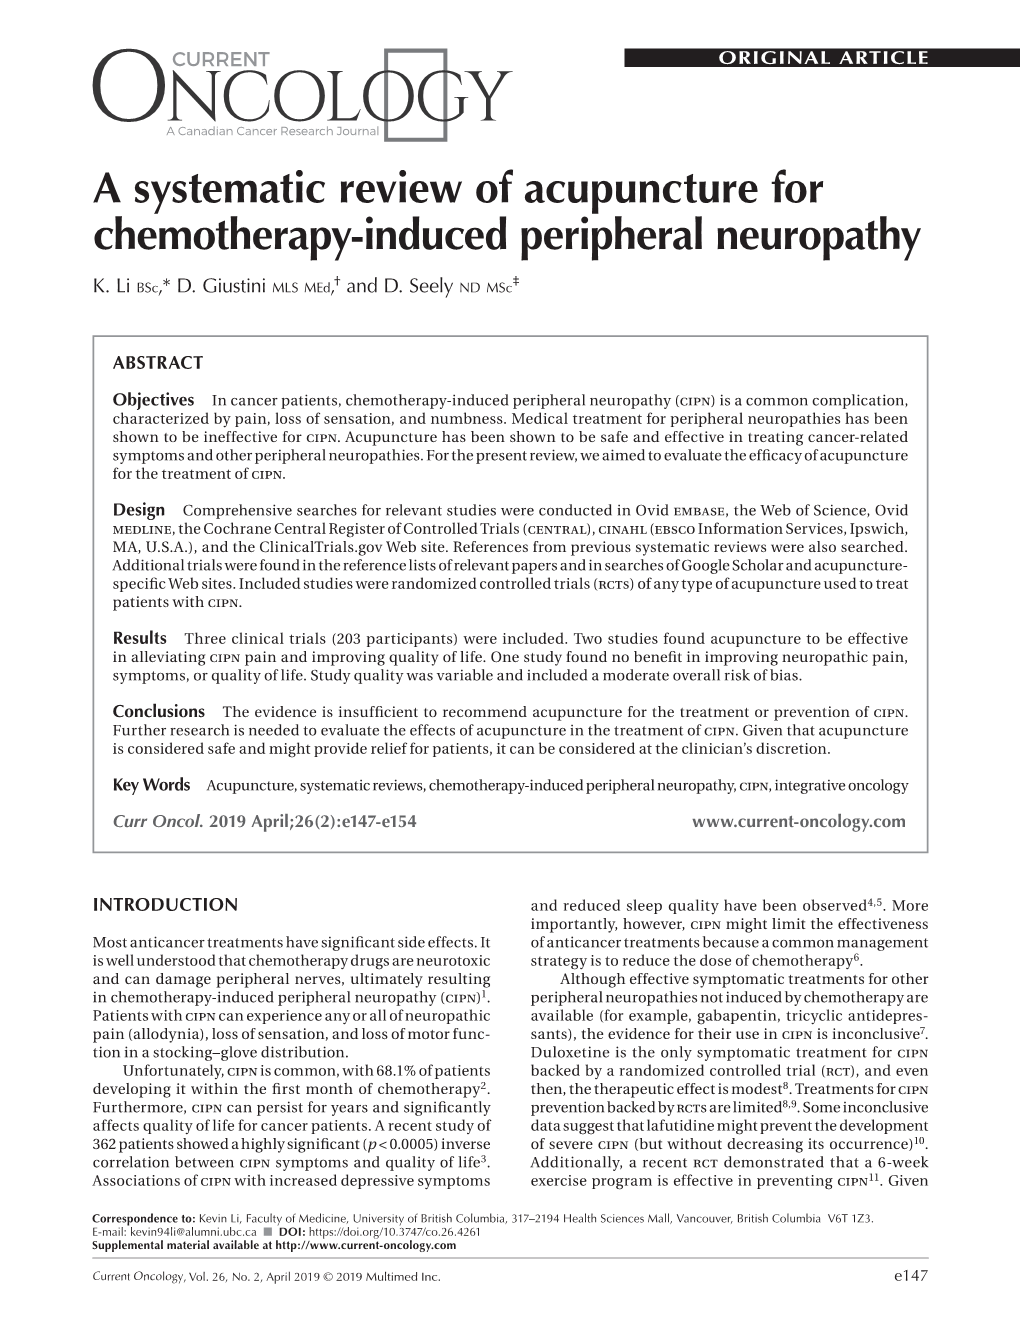 A Systematic Review of Acupuncture for Chemotherapy-Induced Peripheral Neuropathy